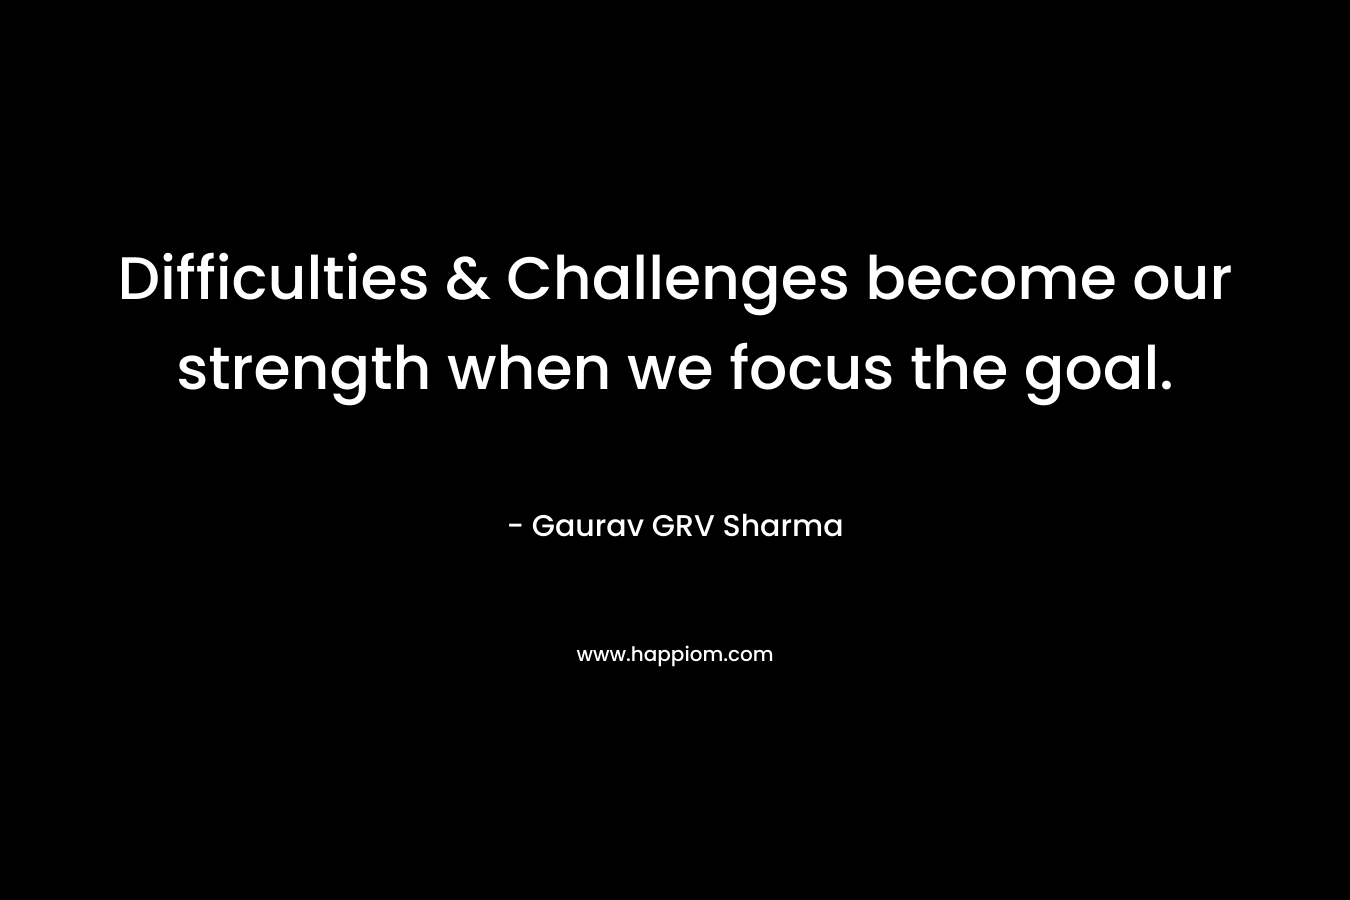 Difficulties & Challenges become our strength when we focus the goal. – Gaurav GRV Sharma